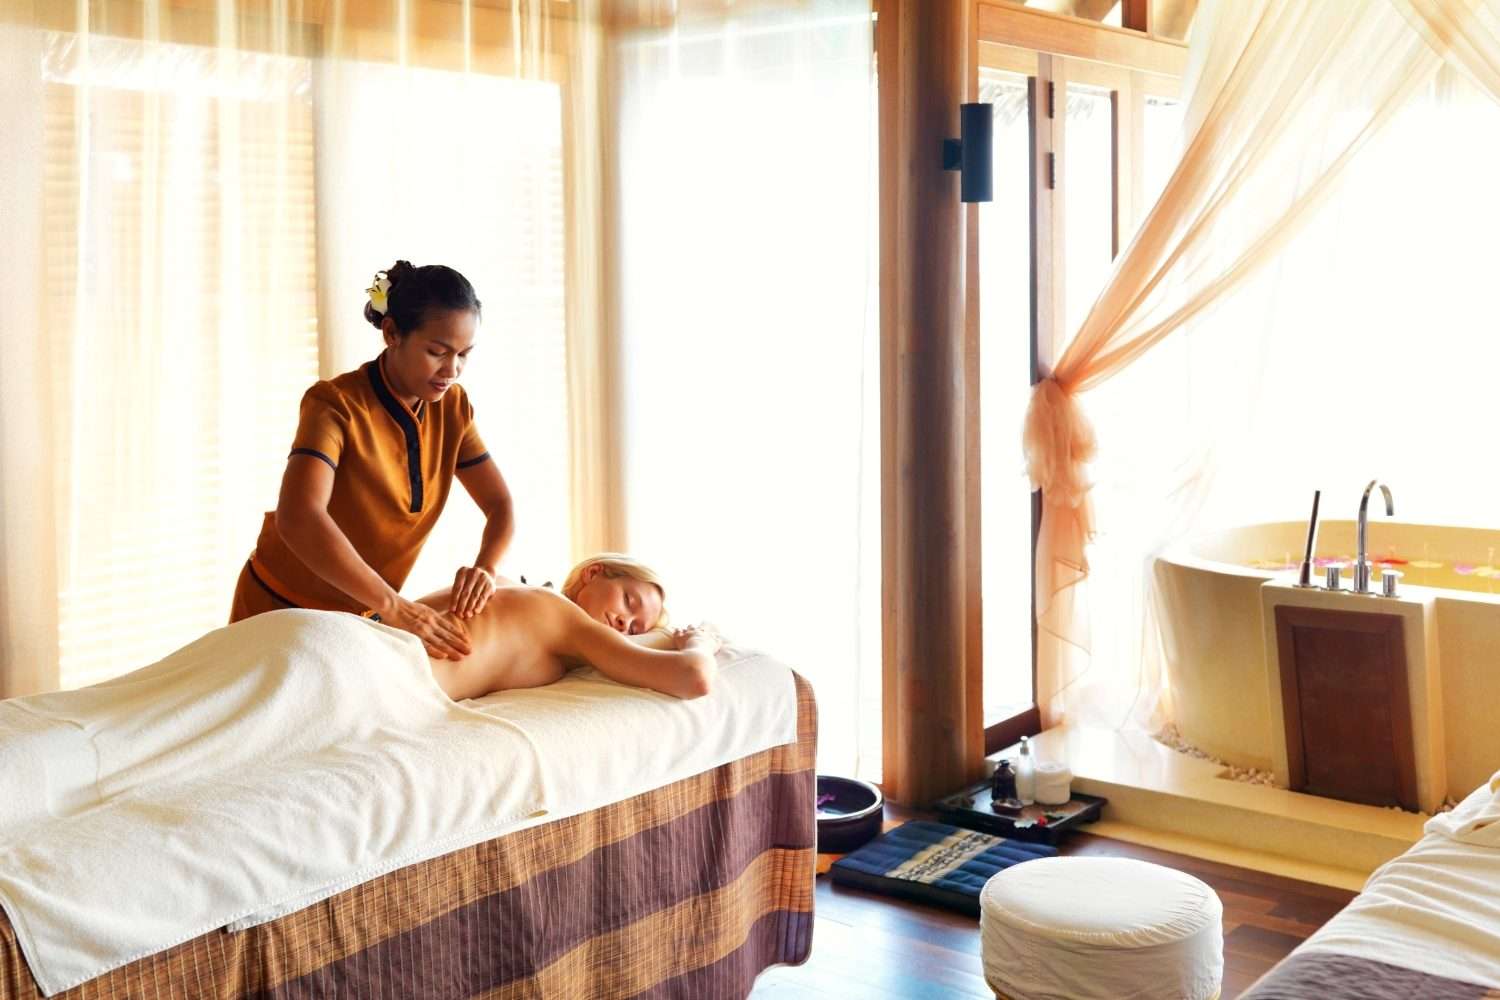 payvalordesigns: How To Become A Massage Therapist In Maine